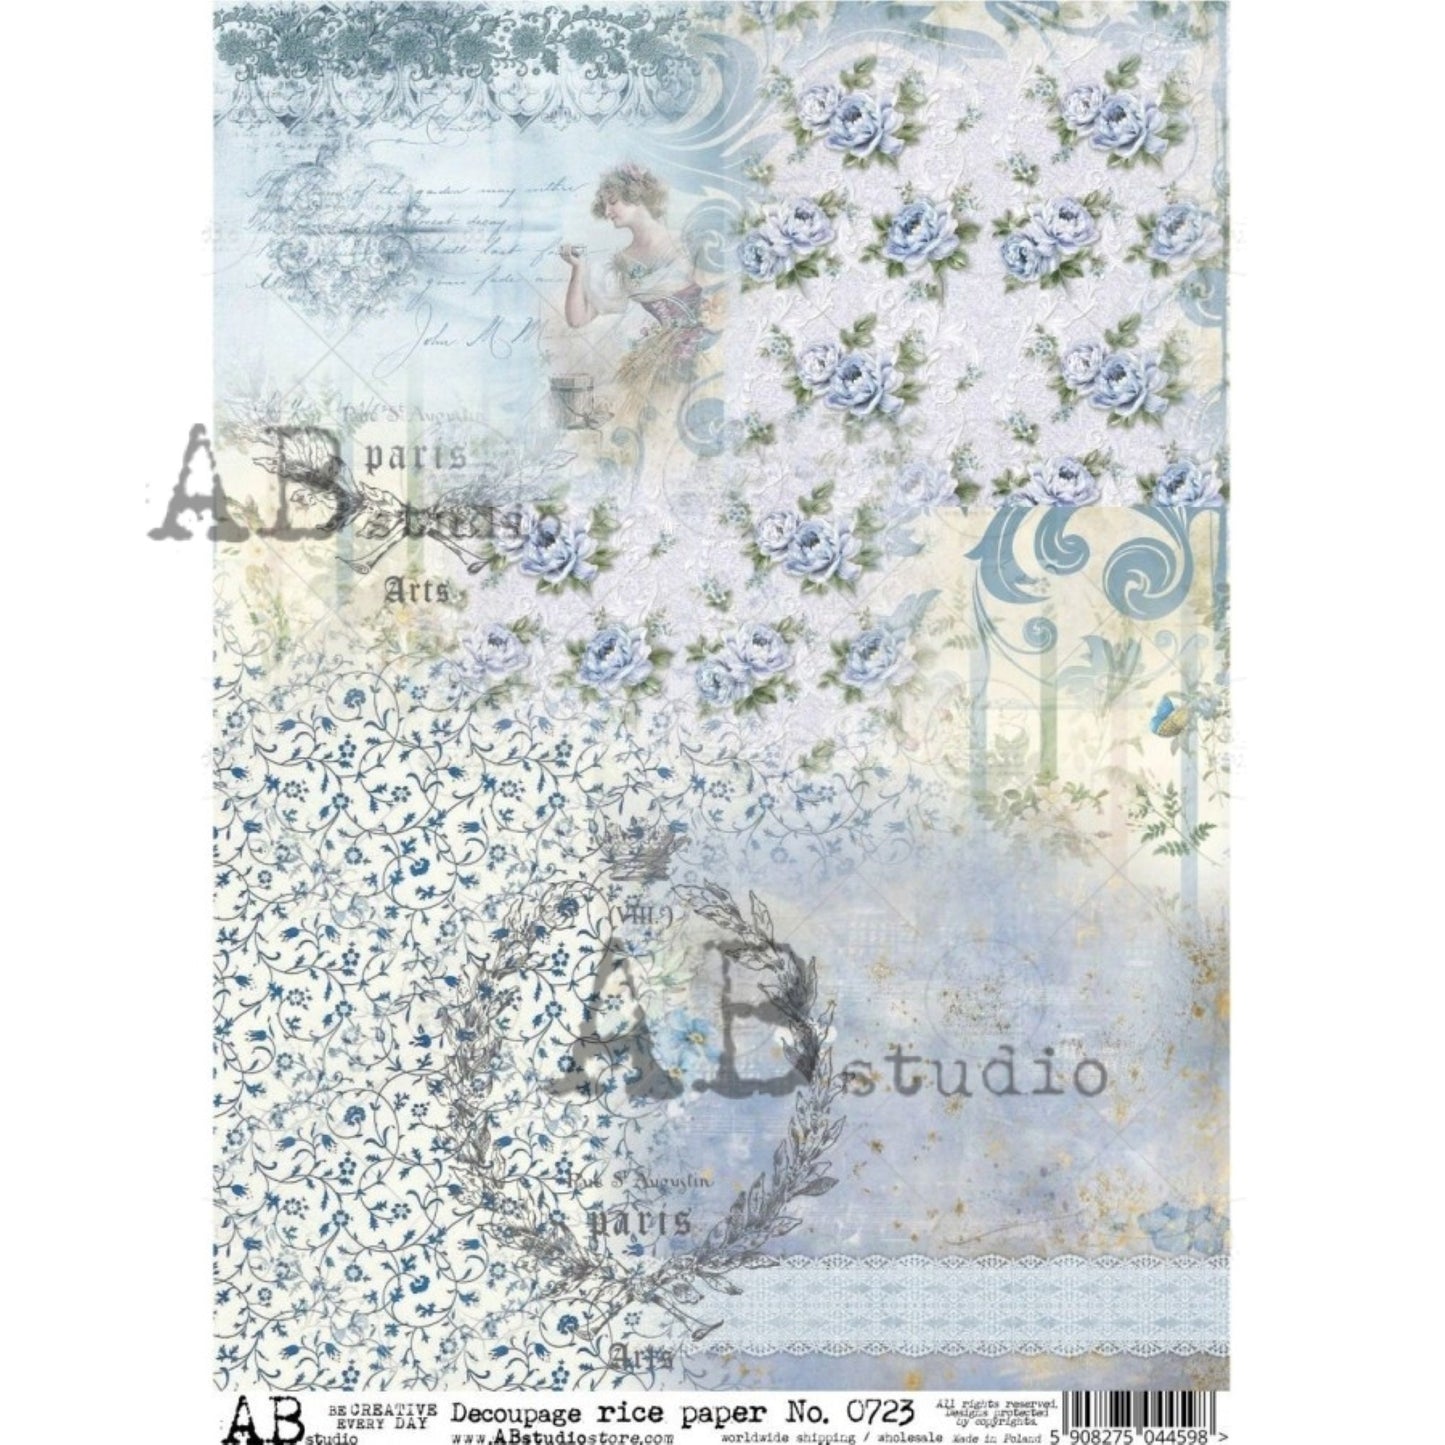 AB Studio Vintage, Shabby Chic, Blue, Flowers, Background, #723 Size: A4 - 8.27 X 11.69 inches Rice Paper for Decoupage Imported from Poland